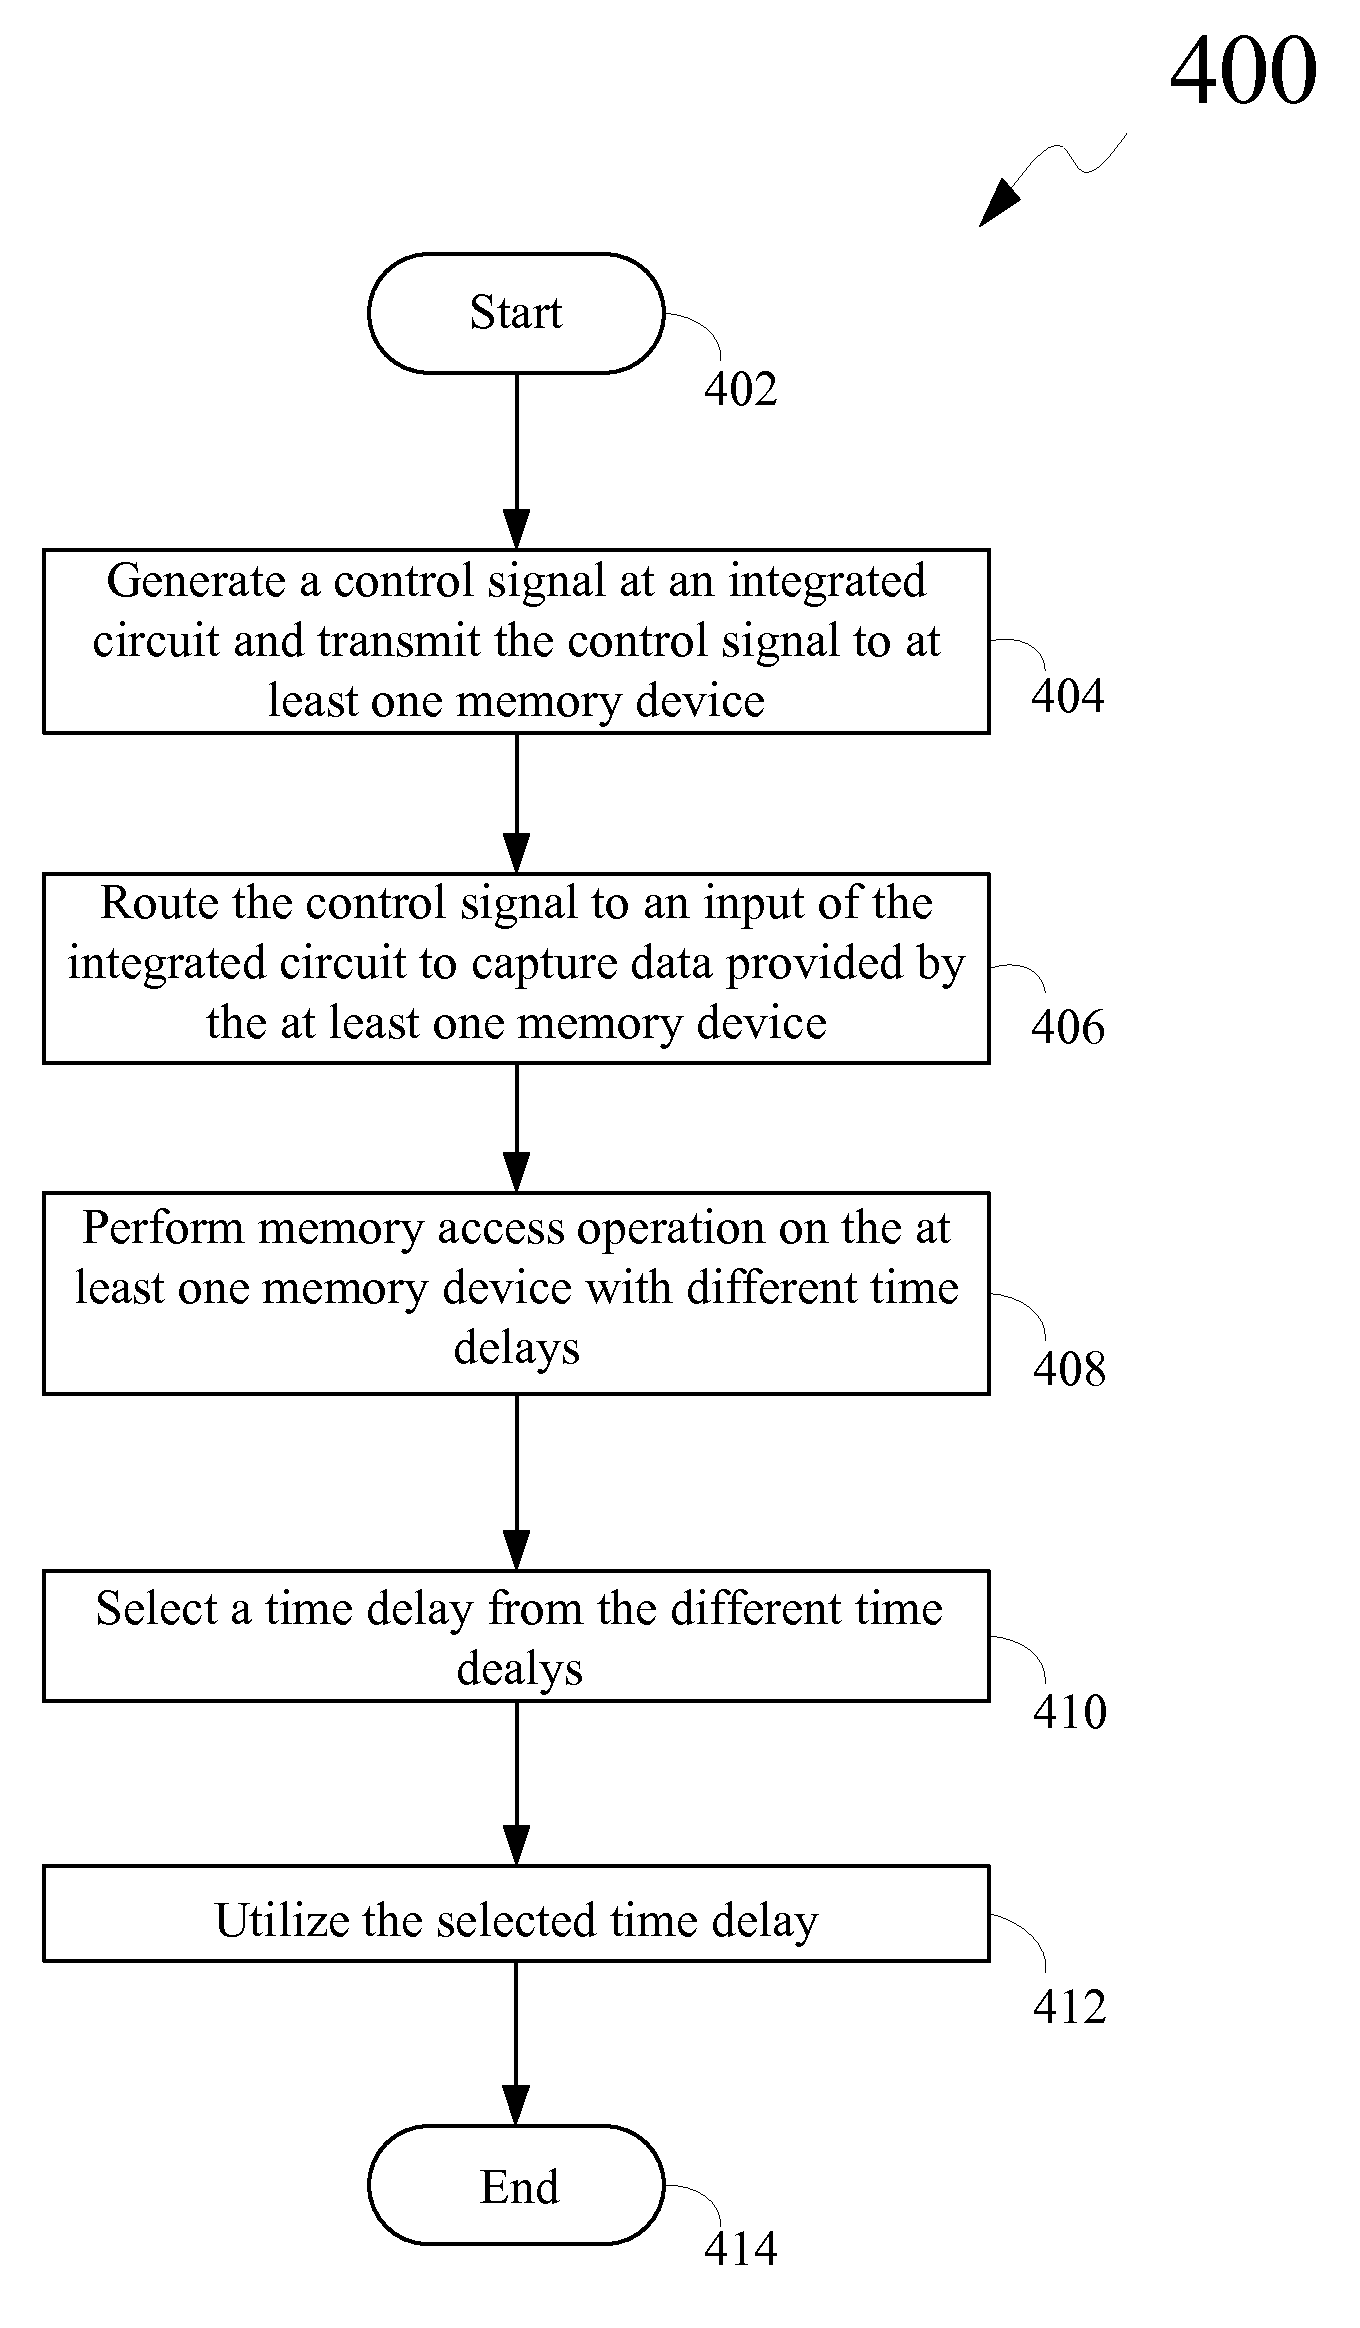 Method for Tuning Control Signal Associated with at Least One Memory Device